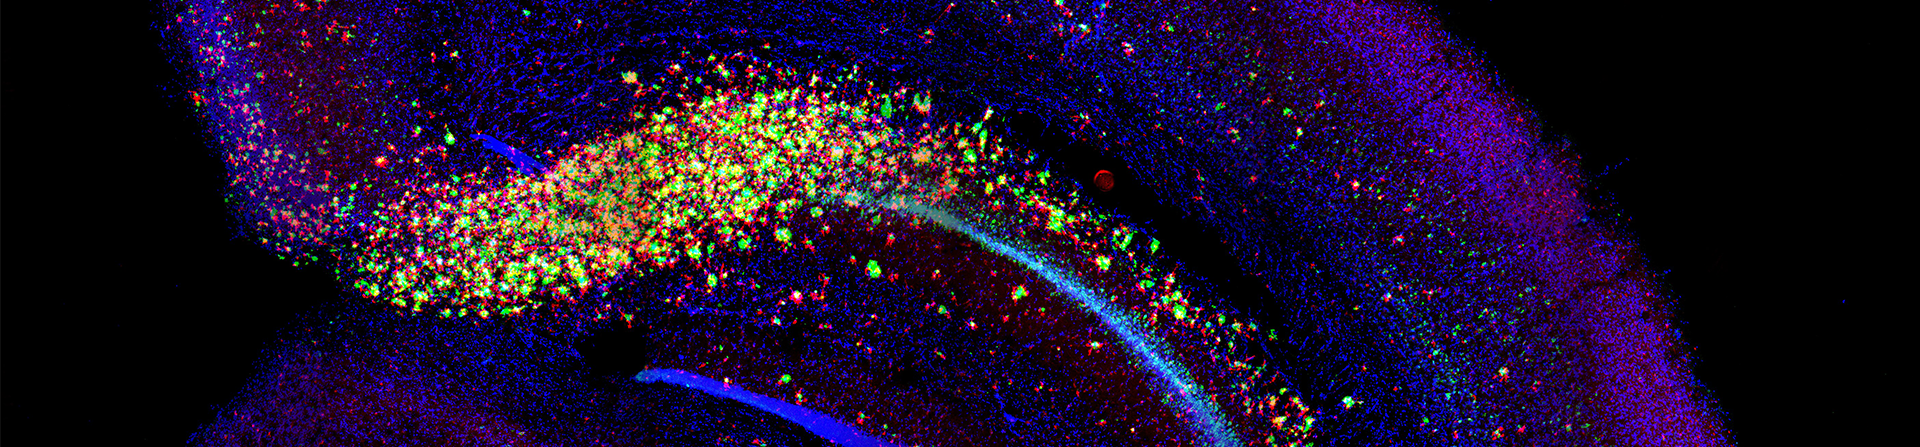 Staining of microglia surrounding amyloid plaque in a Alzheimer's disease mouse model